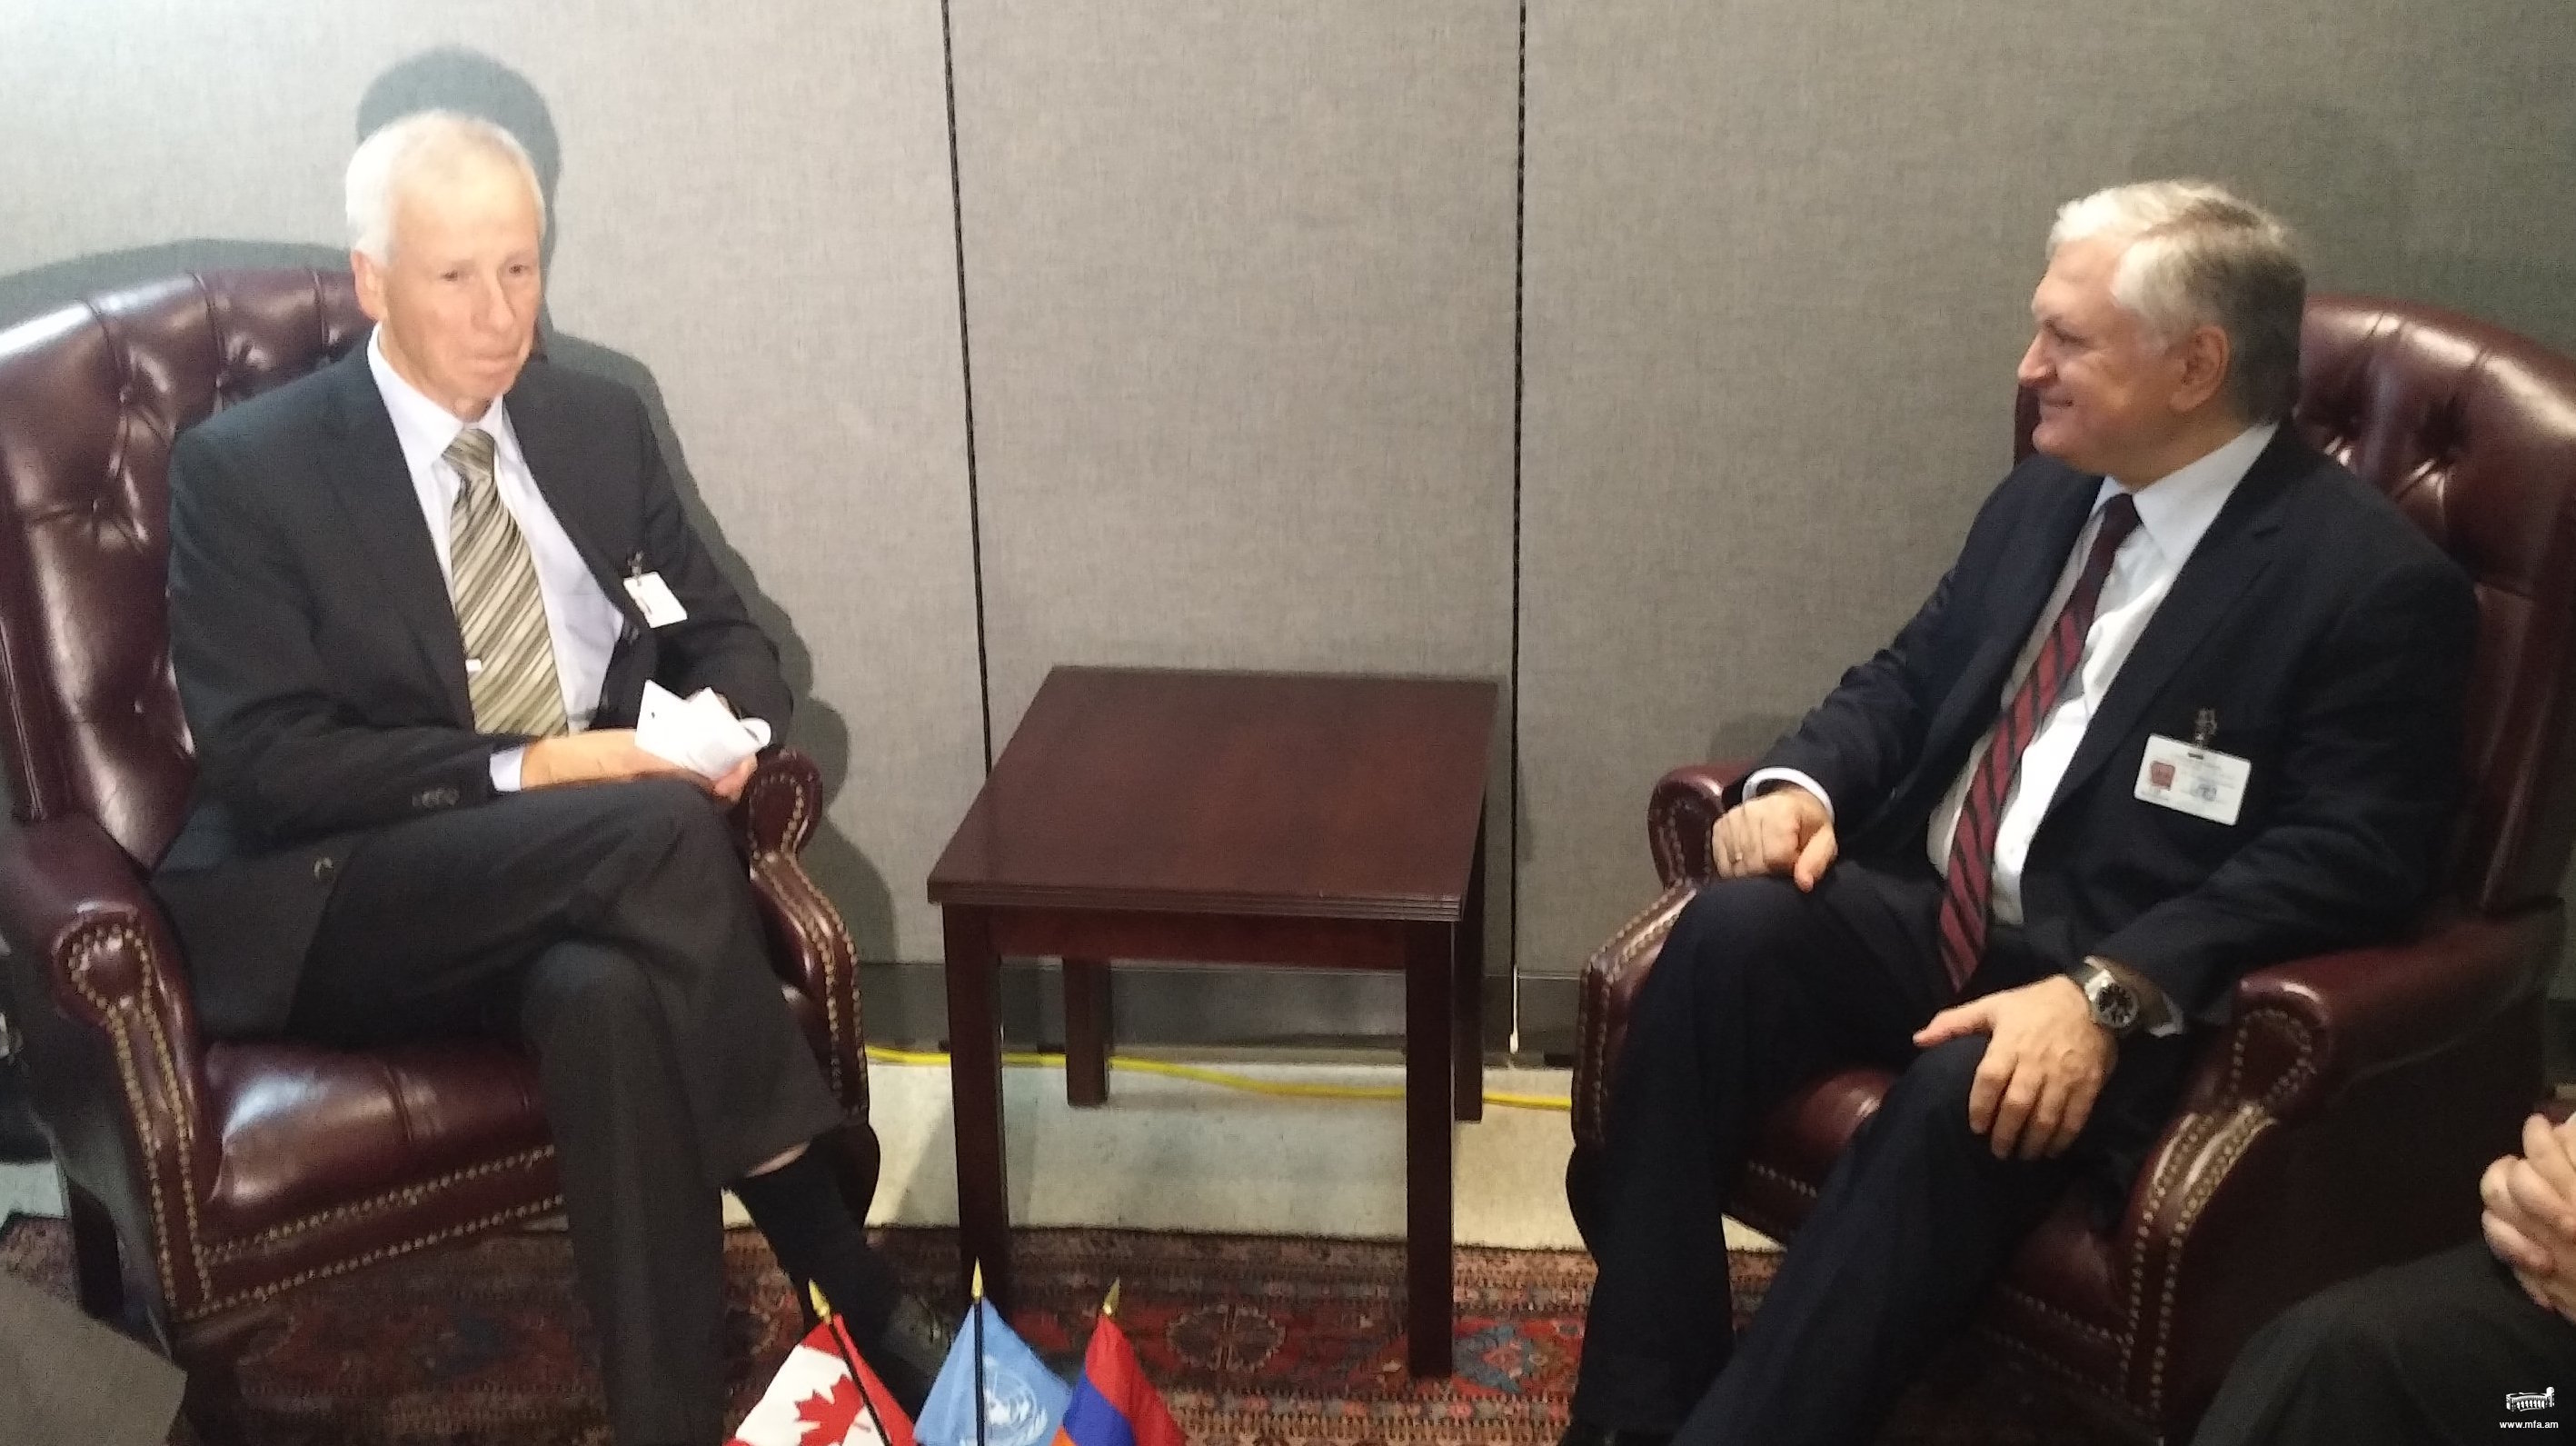 Edward Nalbandian had a meeting with Stéphane Dion, Minister of Foreign Affairs of Canada